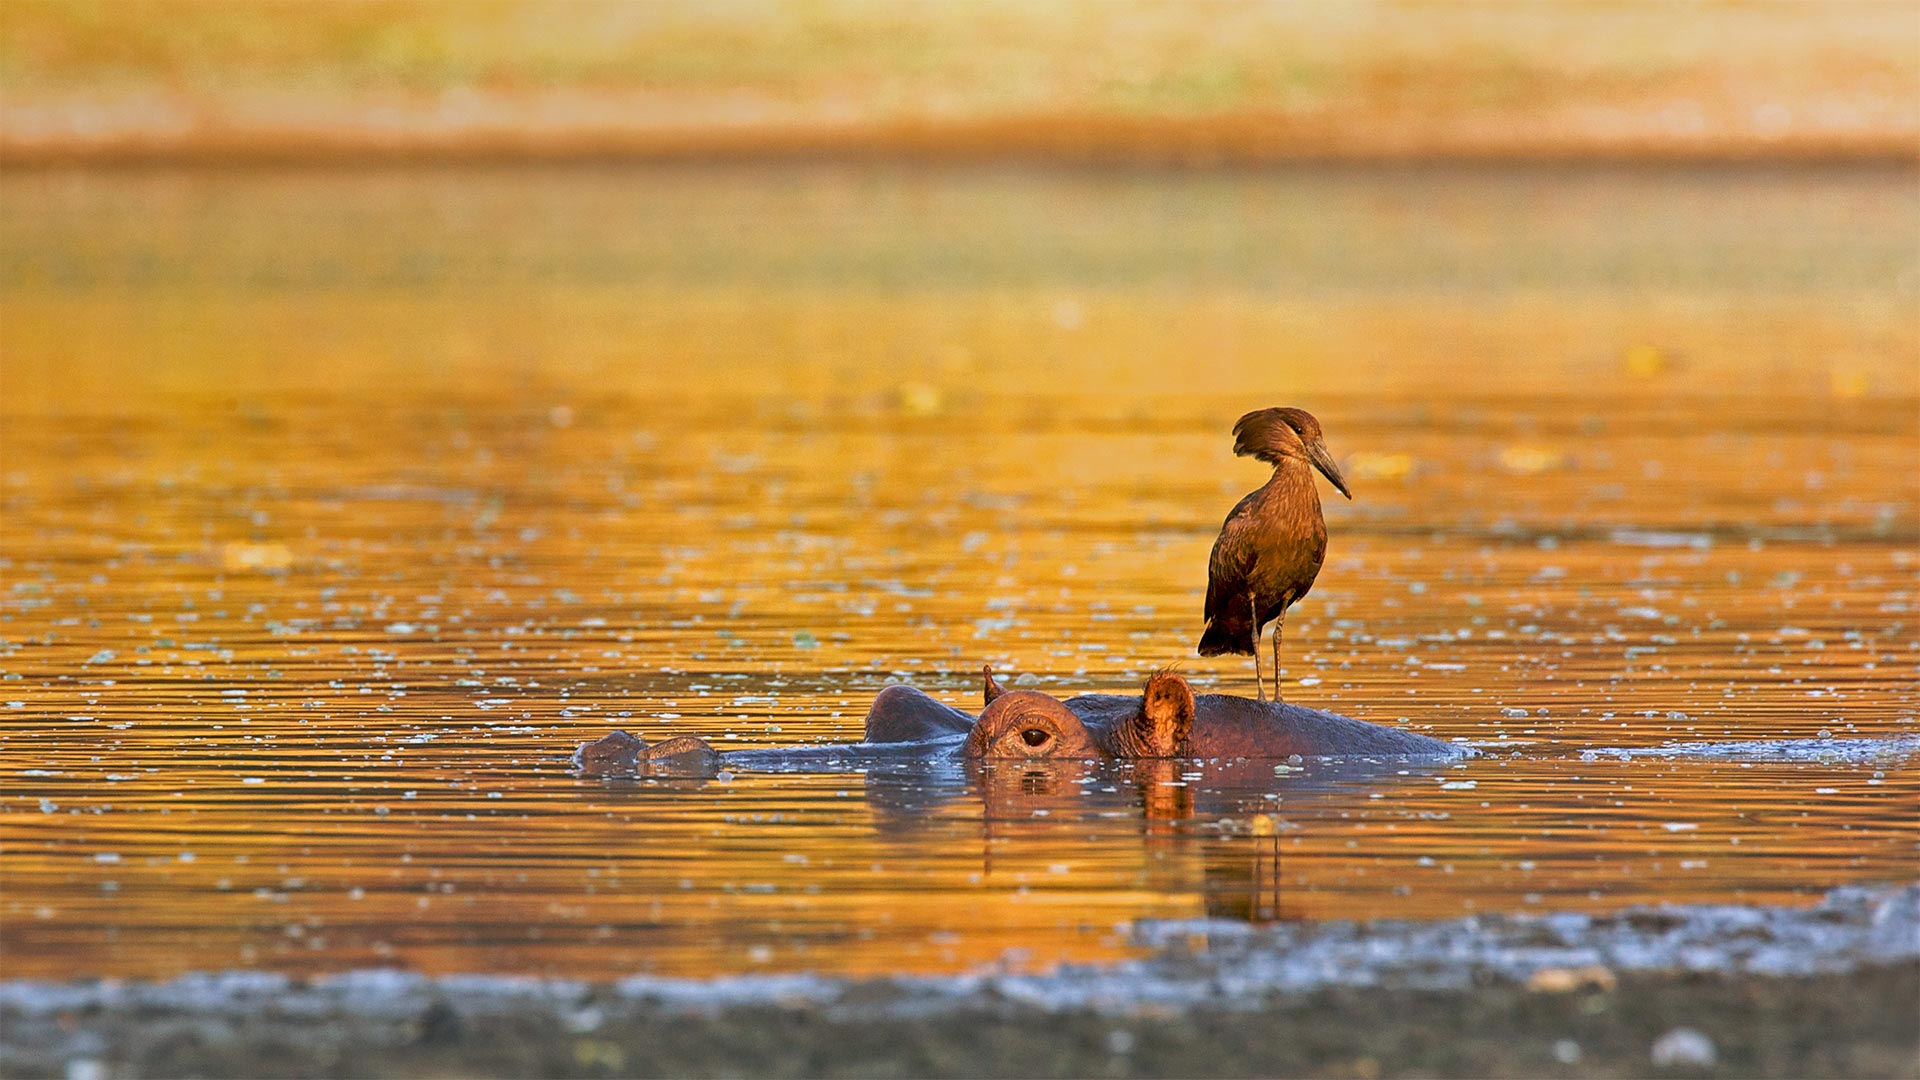 Hamerkop standing on a hippo, Mana Pools National Park, Zimbabwe - David Fettes/Getty Images)